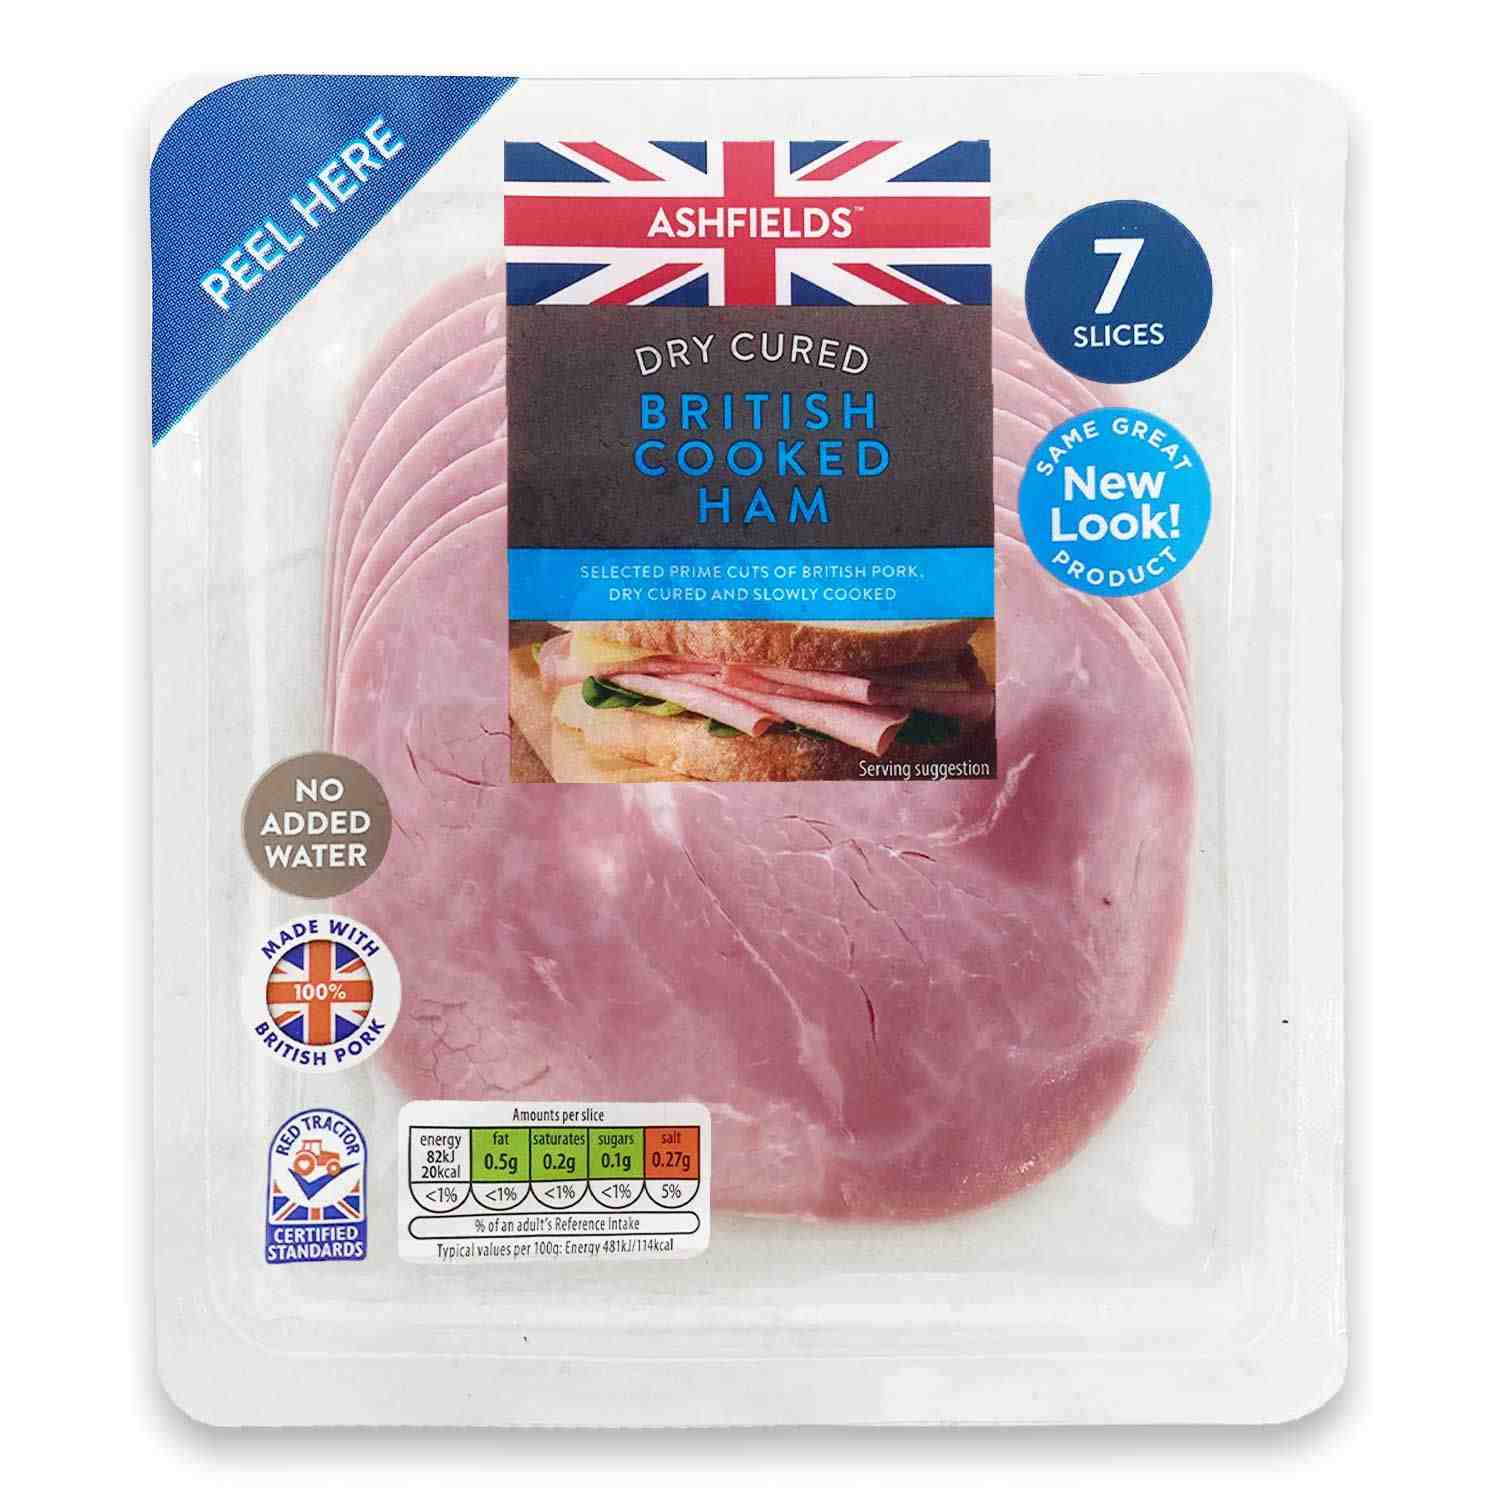 What kind of ham does Aldi's have?